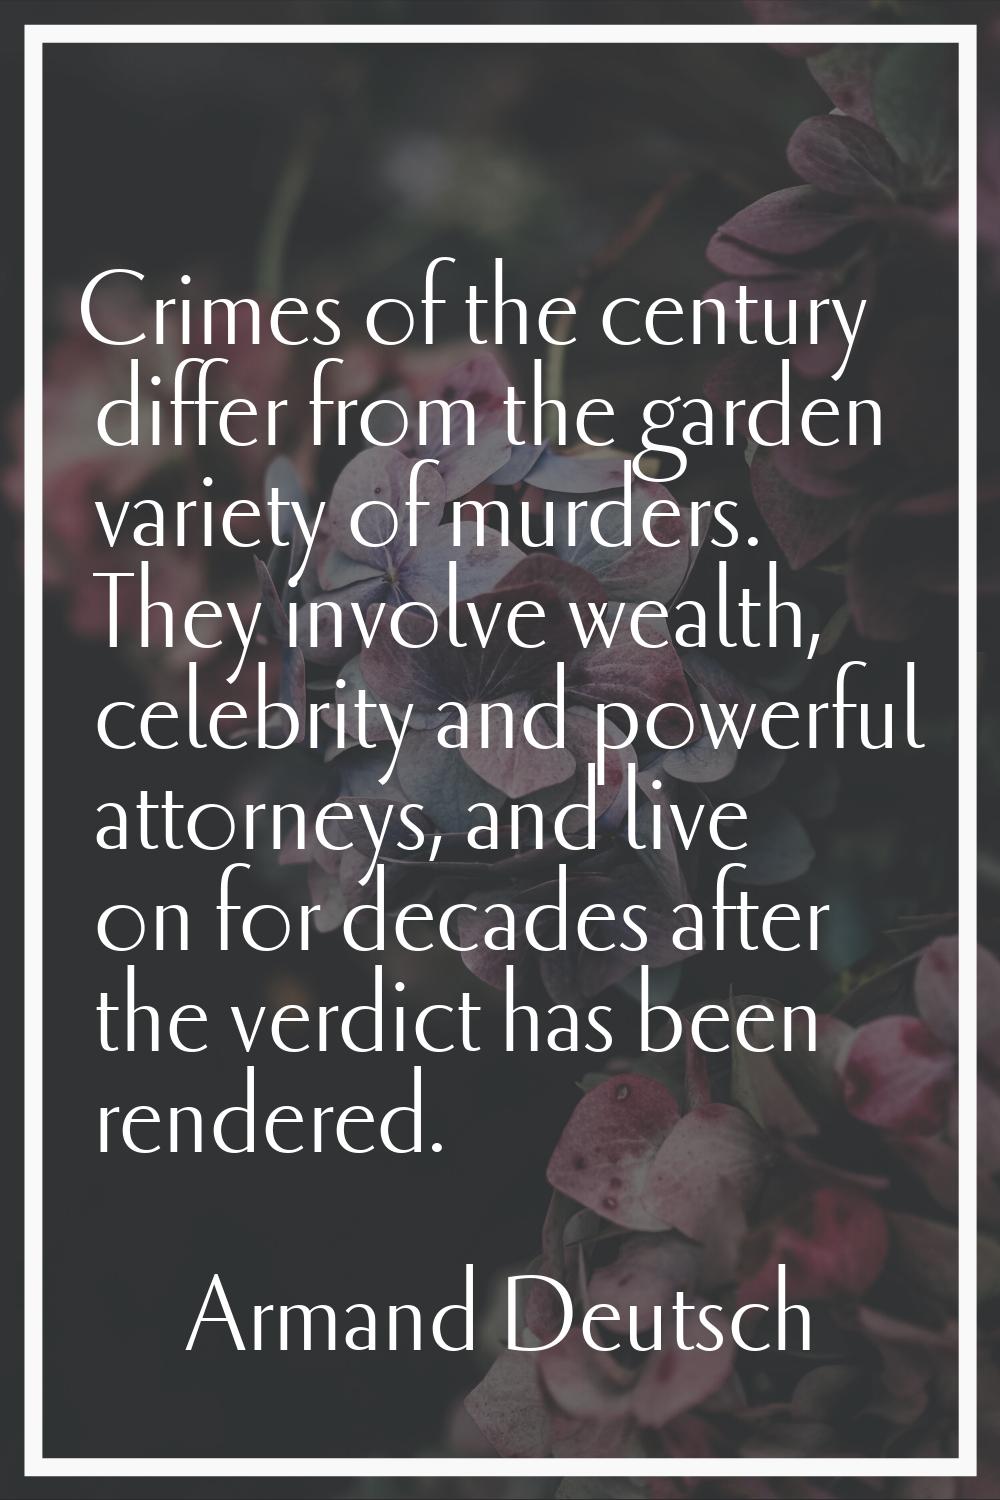 Crimes of the century differ from the garden variety of murders. They involve wealth, celebrity and